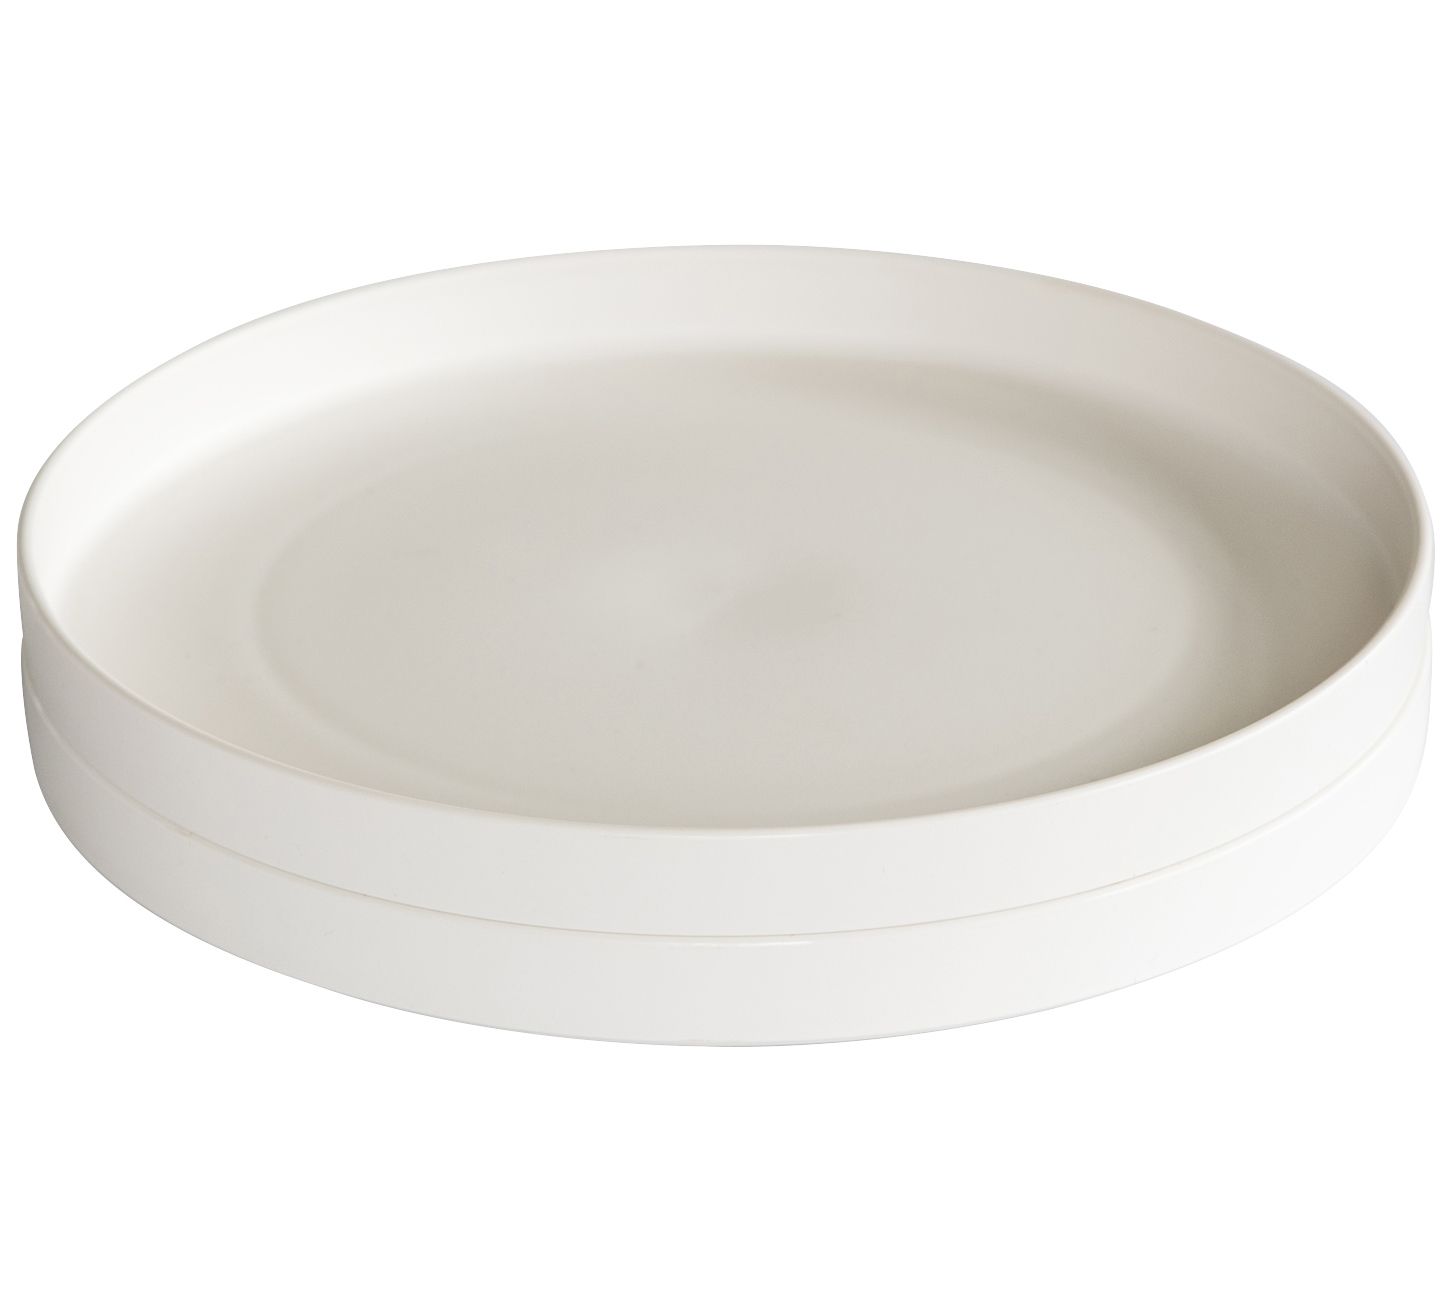 Microwave Plate Stacker - Nordic Ware